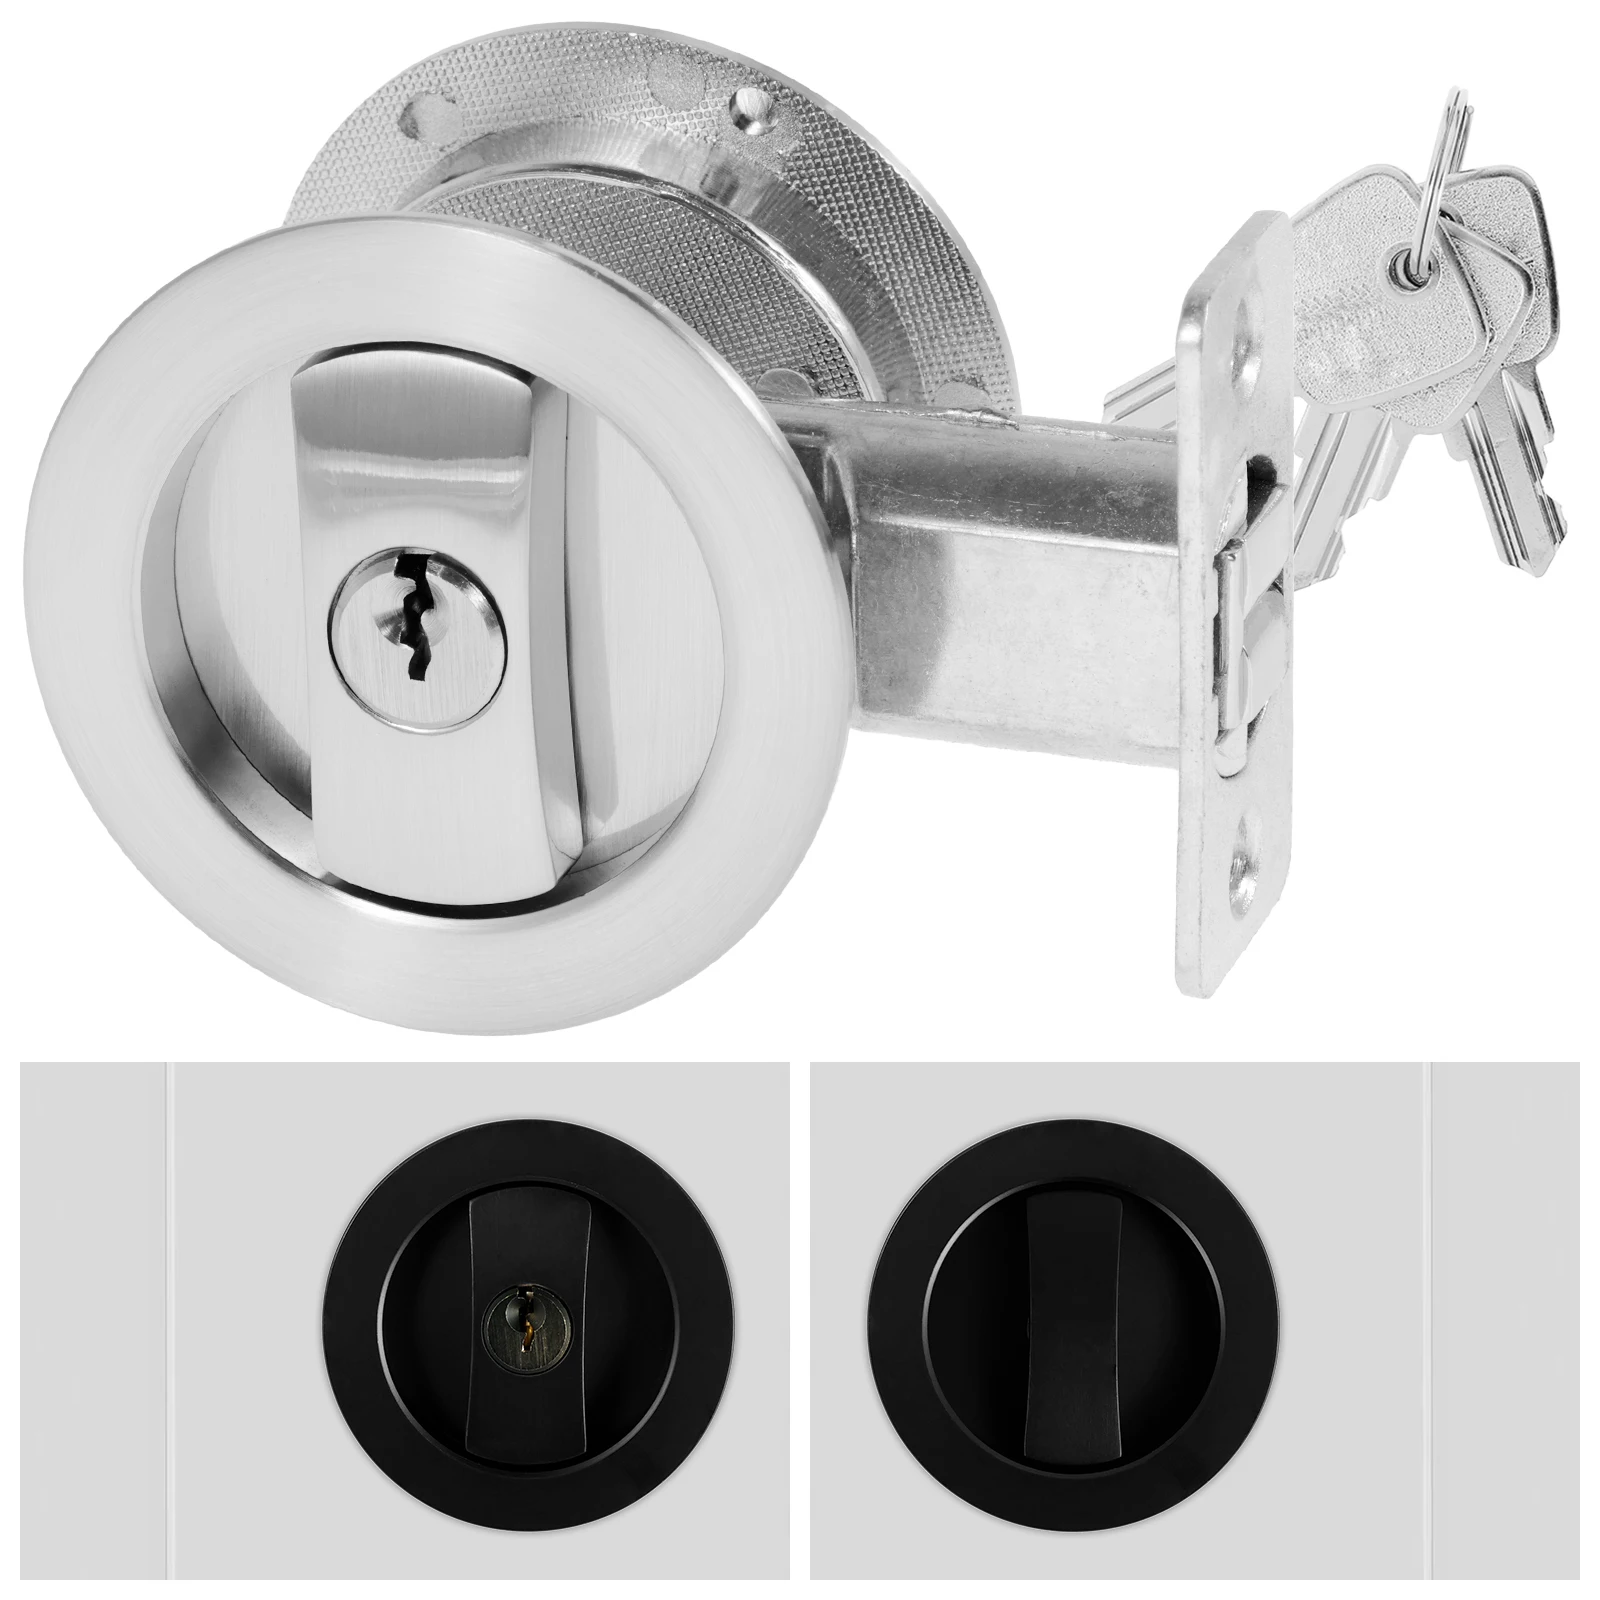 Bed/Bath Pocket Door Lock and Pull Round Privacy Door Lock with Key Recessed 2 Sided Invisible Sliding Door Locks Hardware for 1